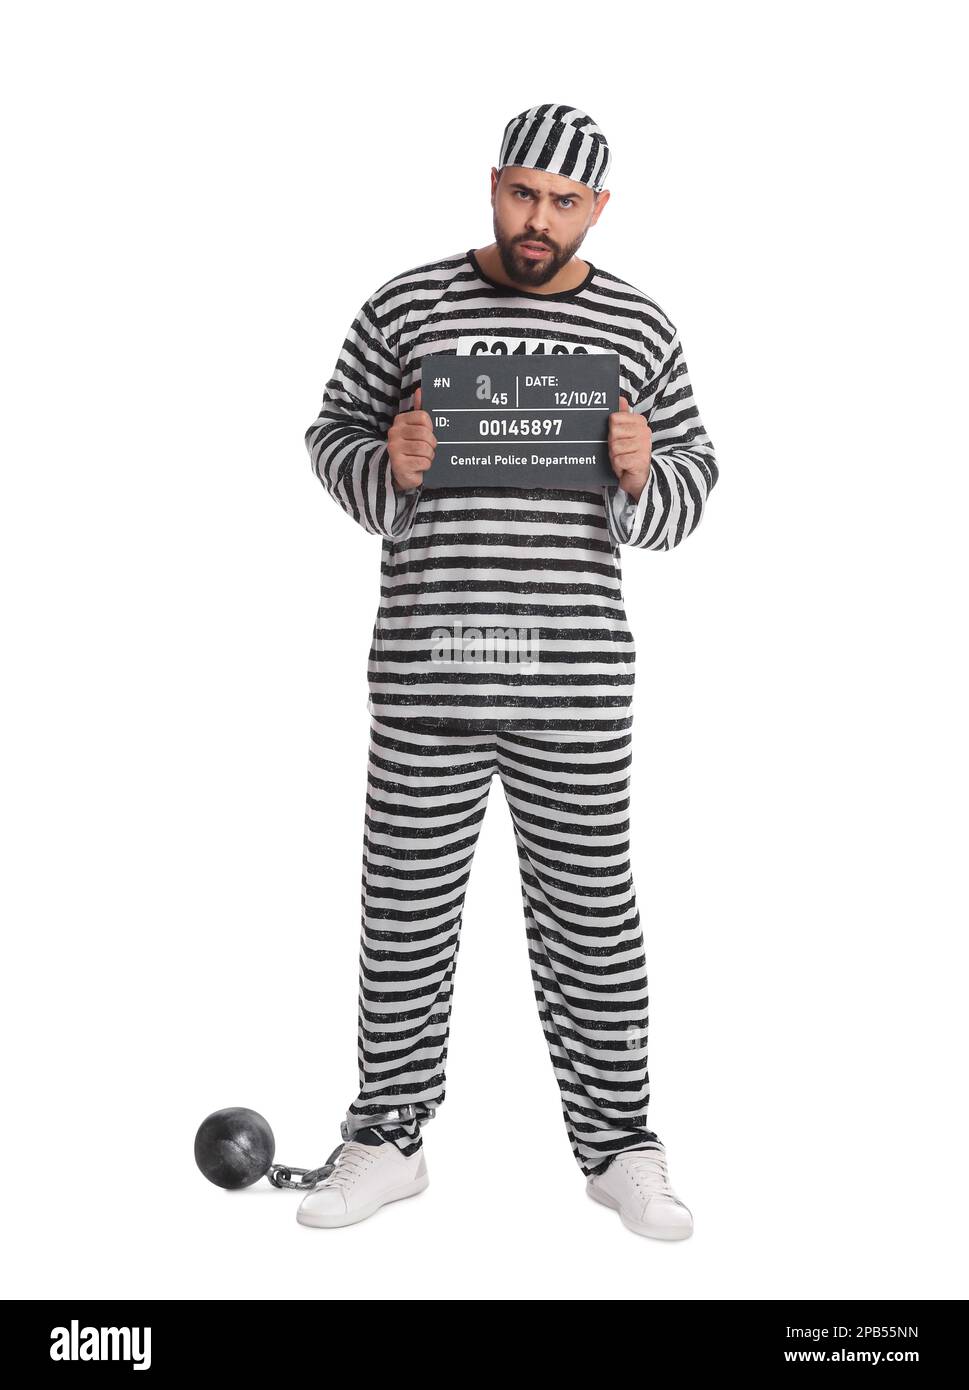 Prisoner in special uniform with mugshot letter board and metal ball on white background Stock Photo